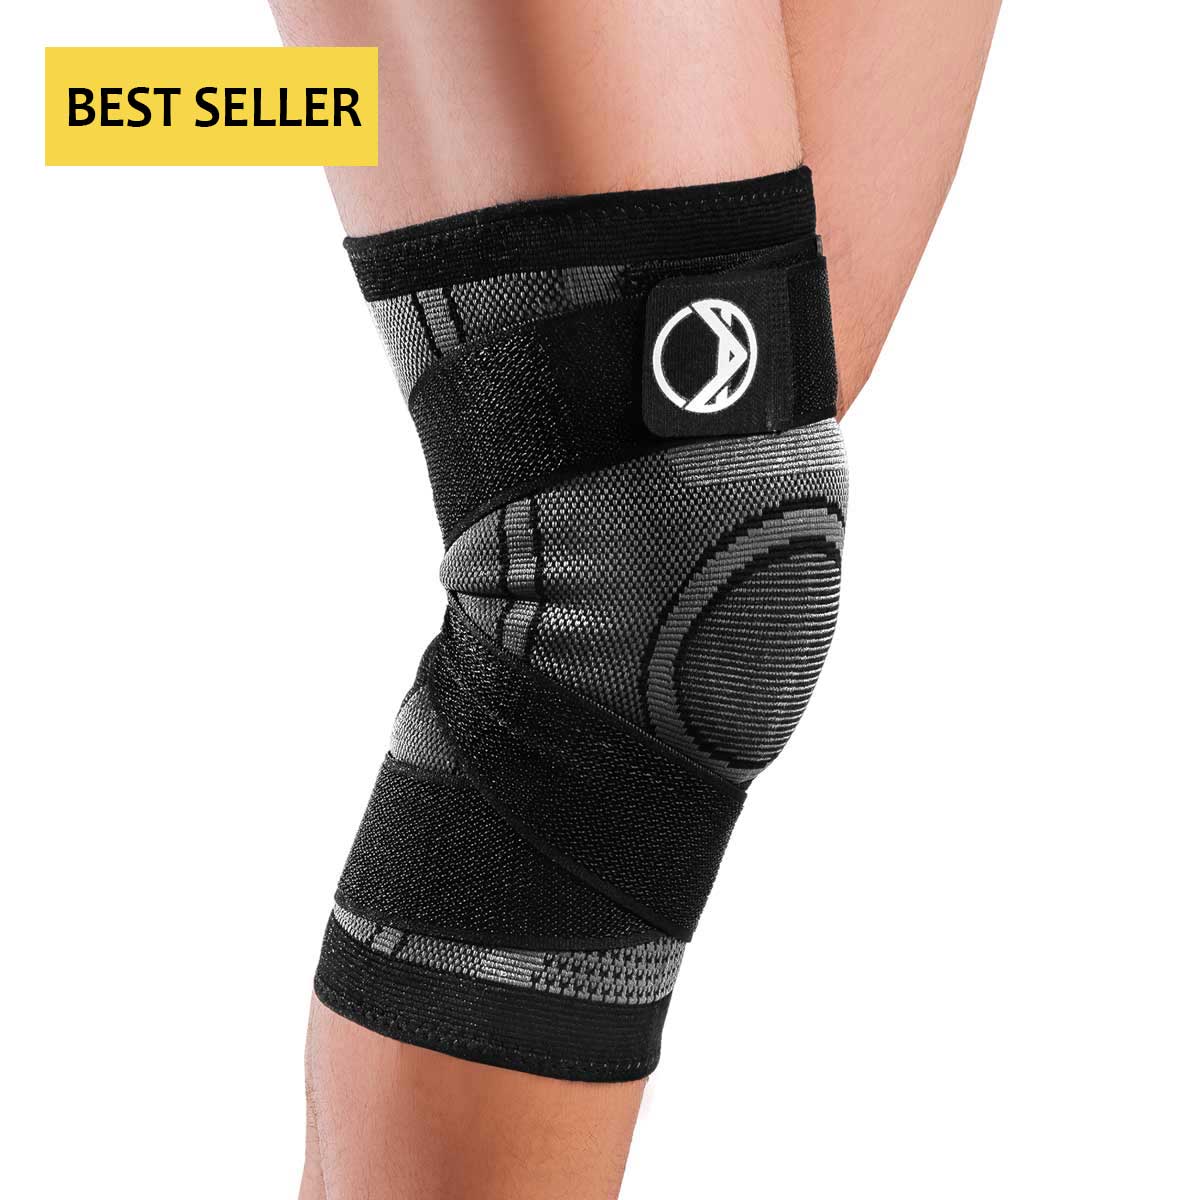 Caresole Circa Knee Compression Sleeve Review: Do They Work?